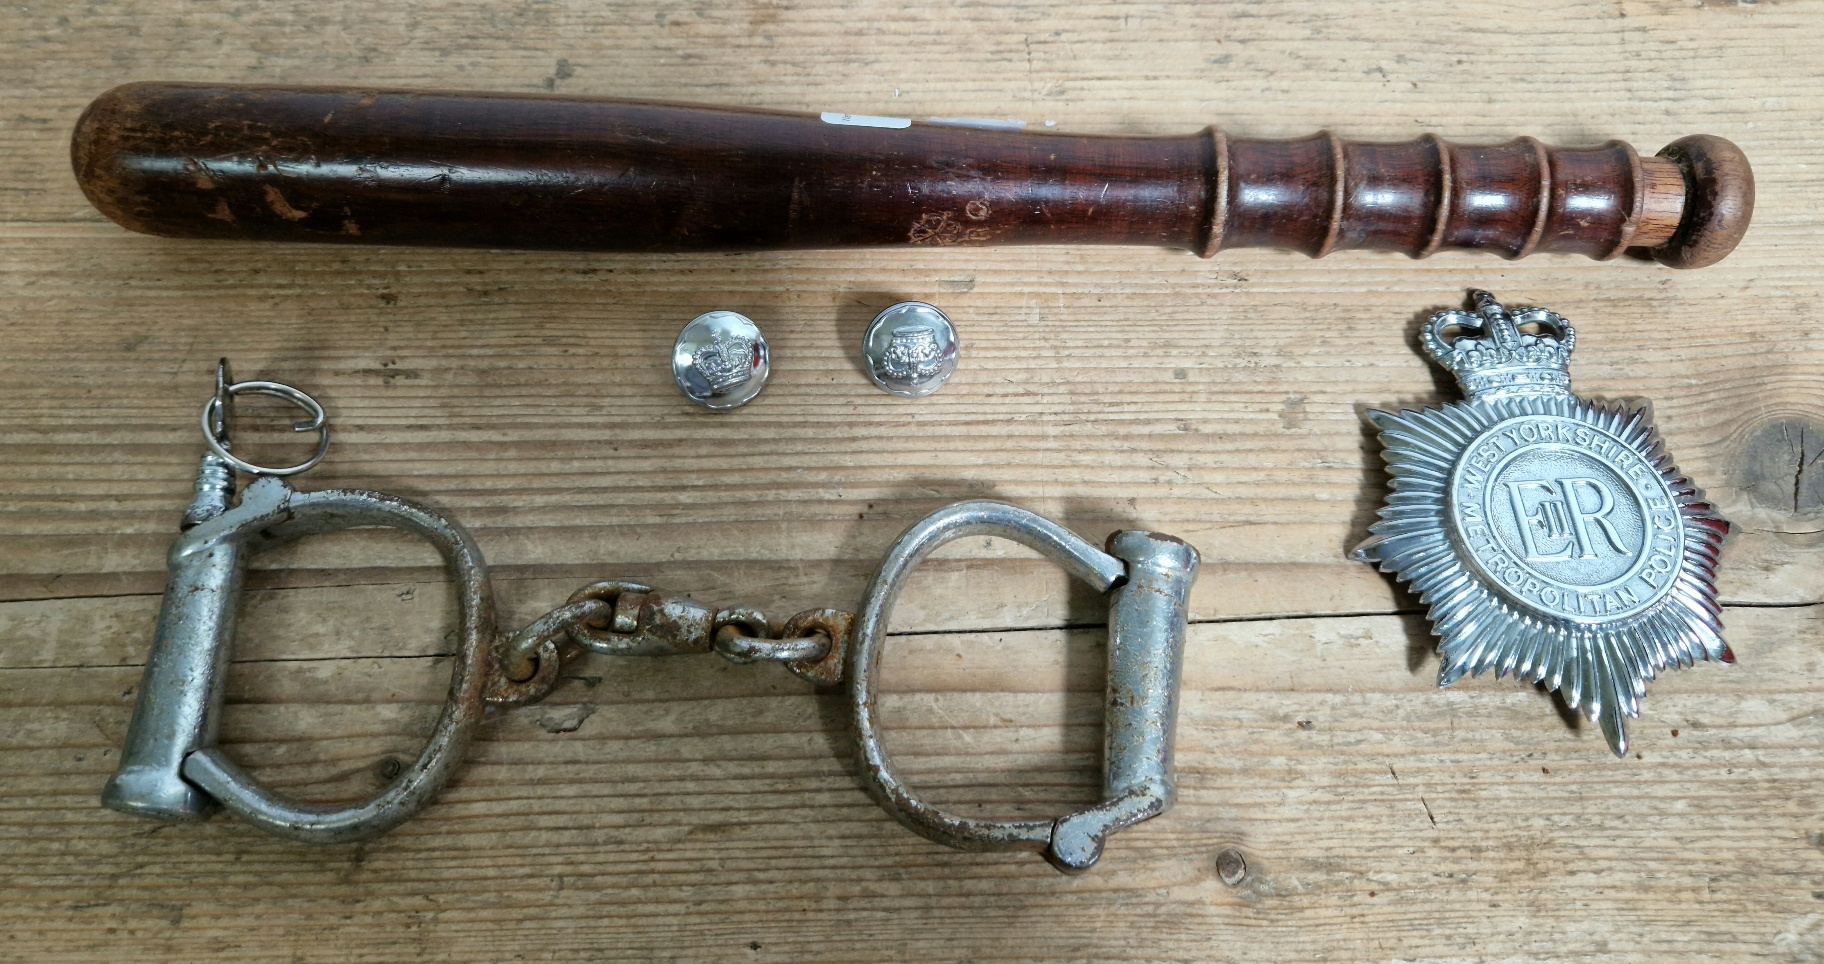 A wooden truncheon, West Yorkshire police badge and a pair of early 20th century handcuffs